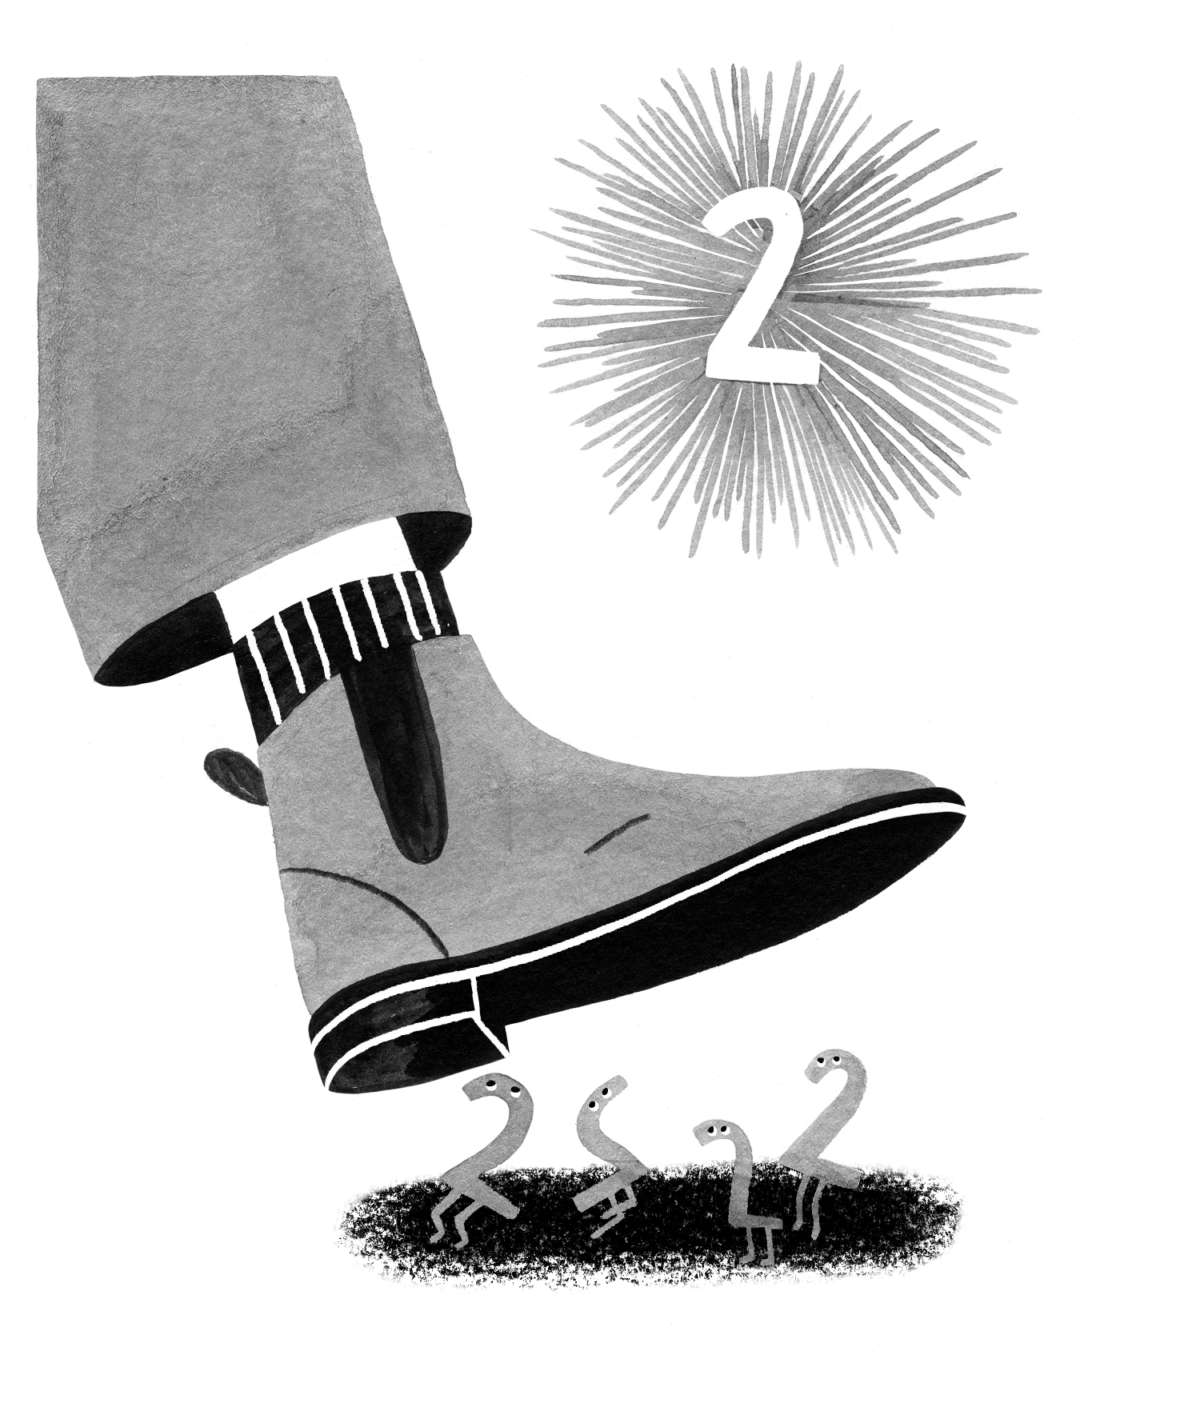 A boot is stomping on 4 anthropomorphized number 2s. Above in the sky is the sun with a giant number 2 in the center.